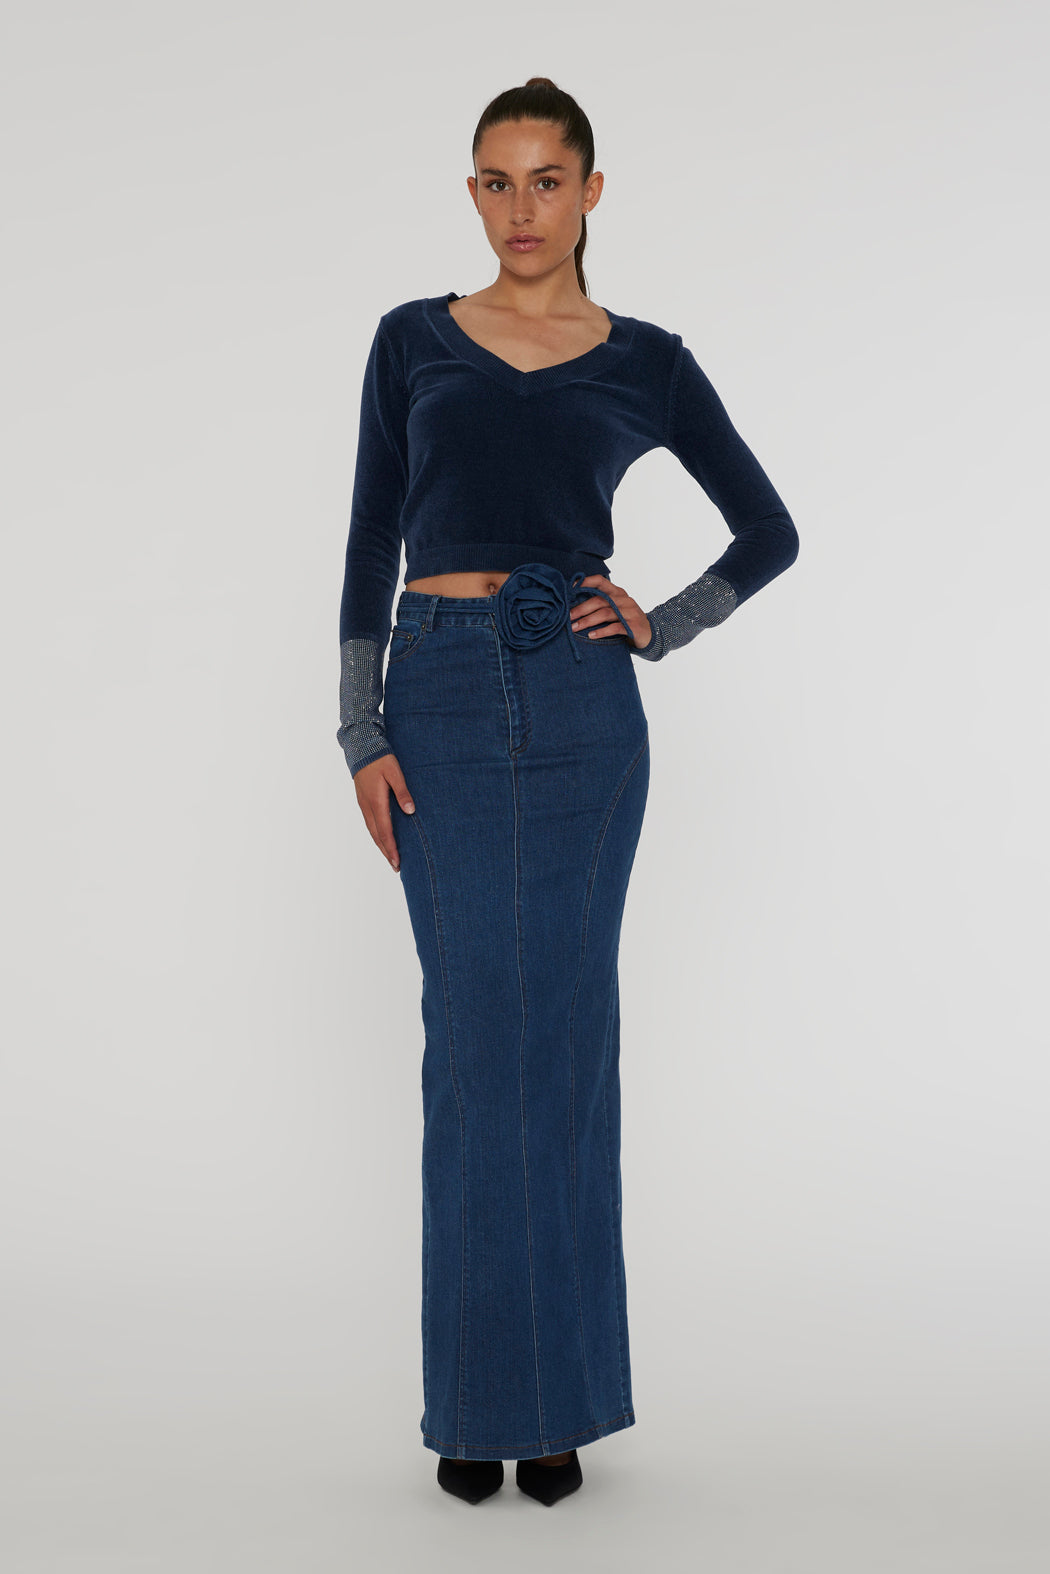 Stretchy Maxi Skirt - Orion Blue